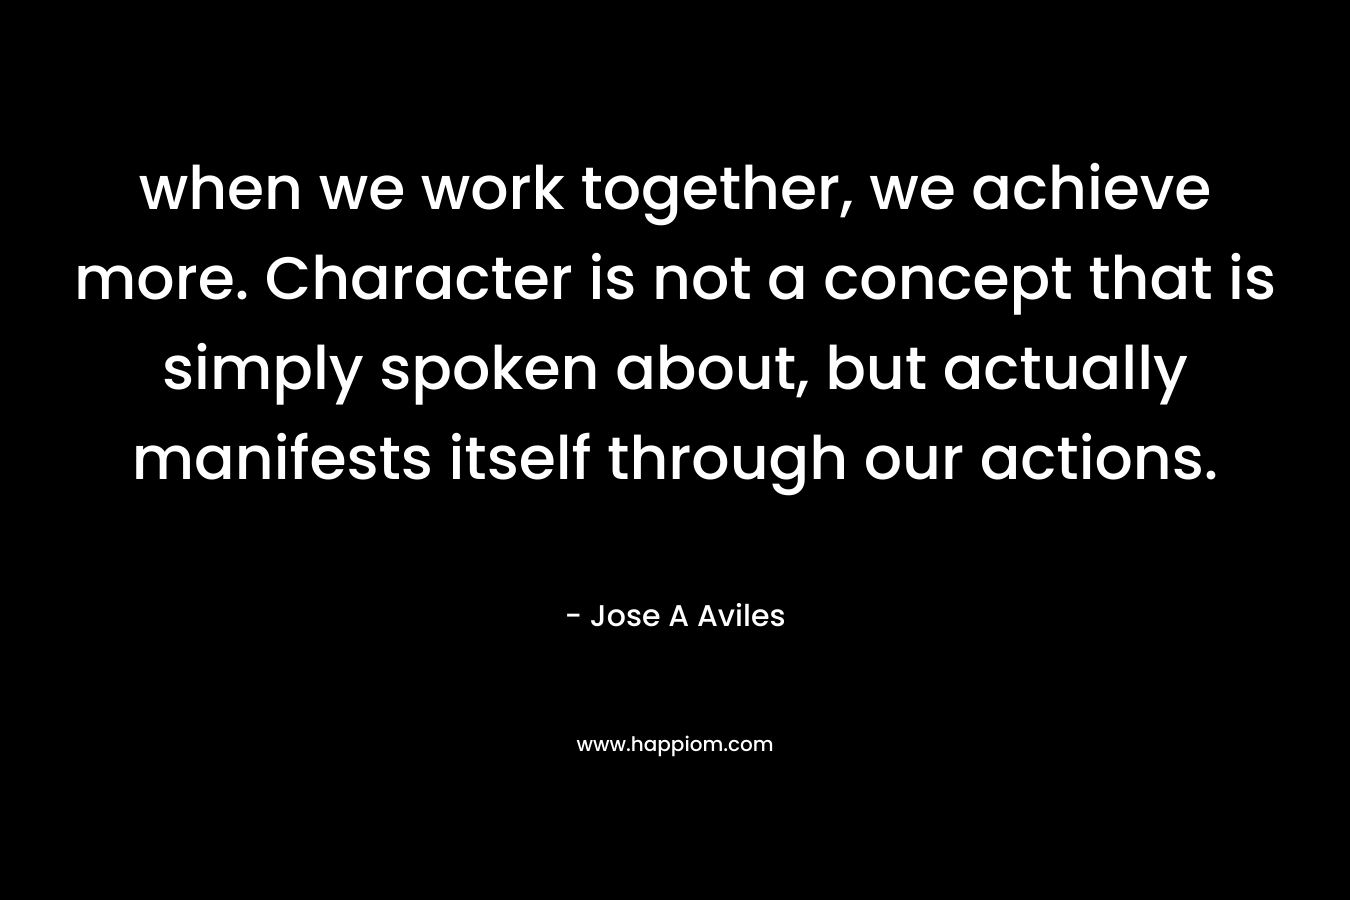 when we work together, we achieve more. Character is not a concept that is simply spoken about, but actually manifests itself through our actions. – Jose A Aviles